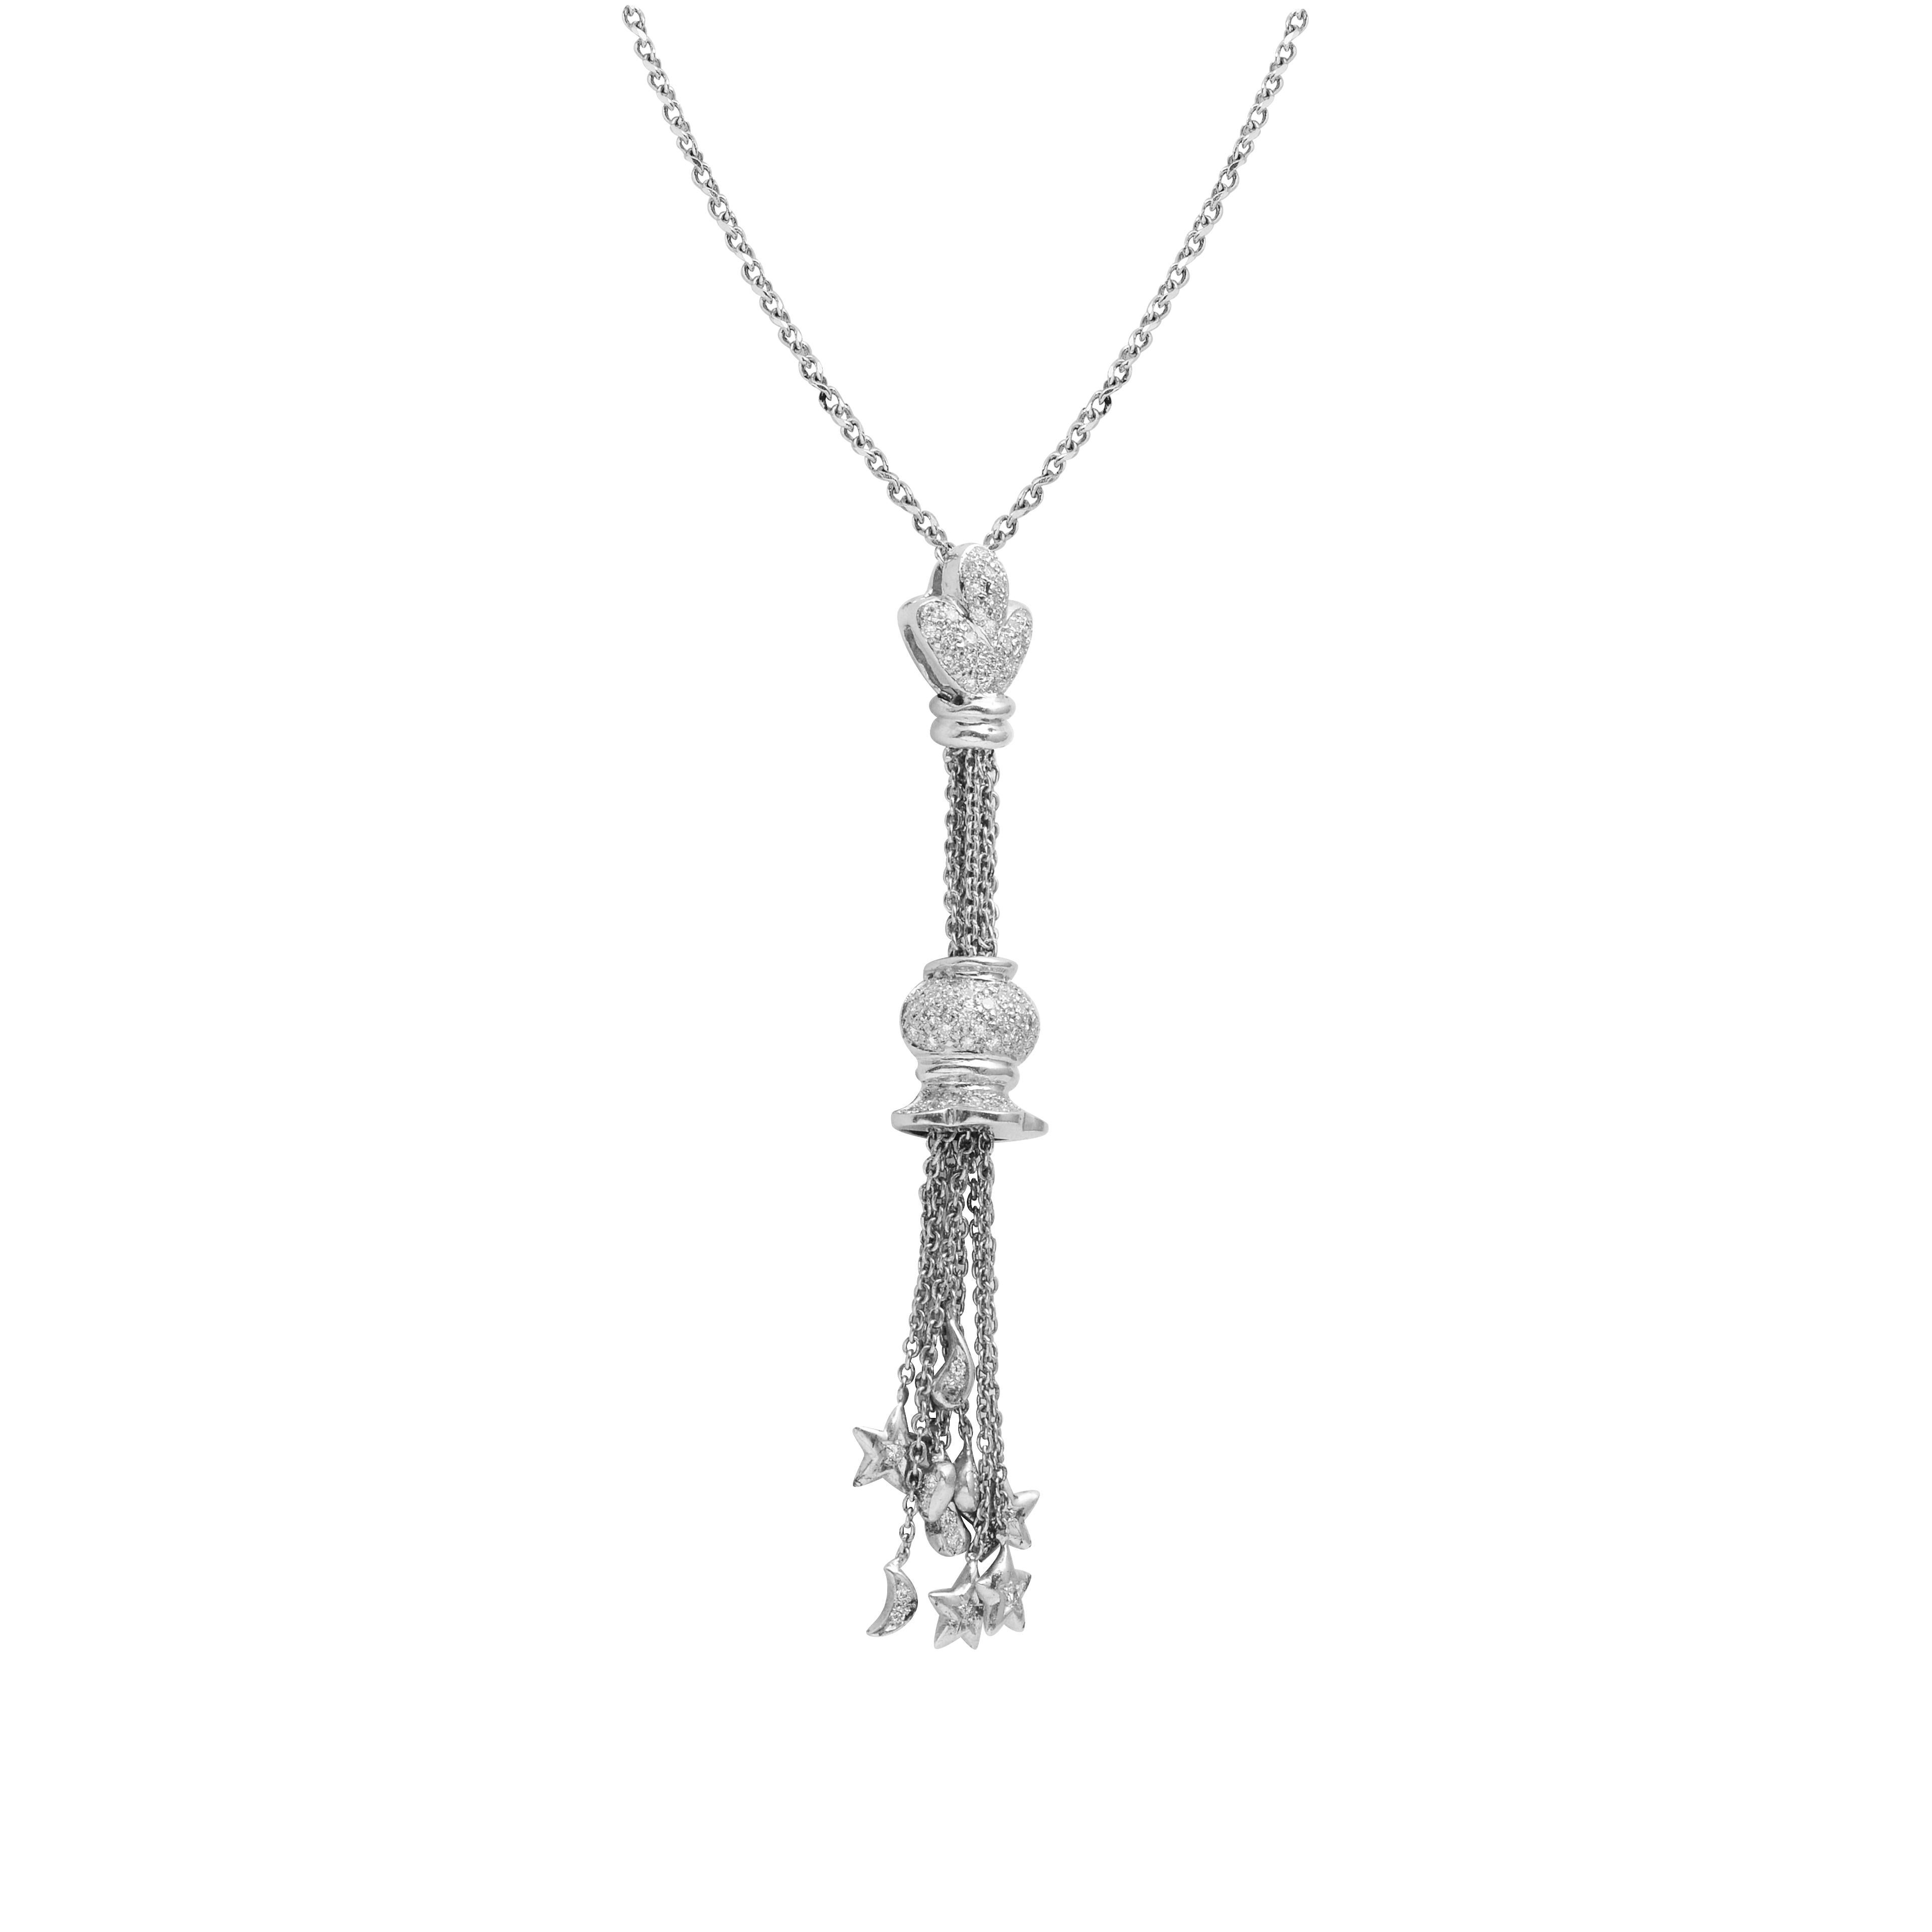 18 Karat White Gold Diamond Pendant with Chain 

Beautiful pendant set in 18 Karat white gold, studded with diamonds is perfect for evening wear including cocktails.

18 Karat White Gold - 17.82 gms
Diamonds - 0.90 cts 
Total Length - 20 Inches